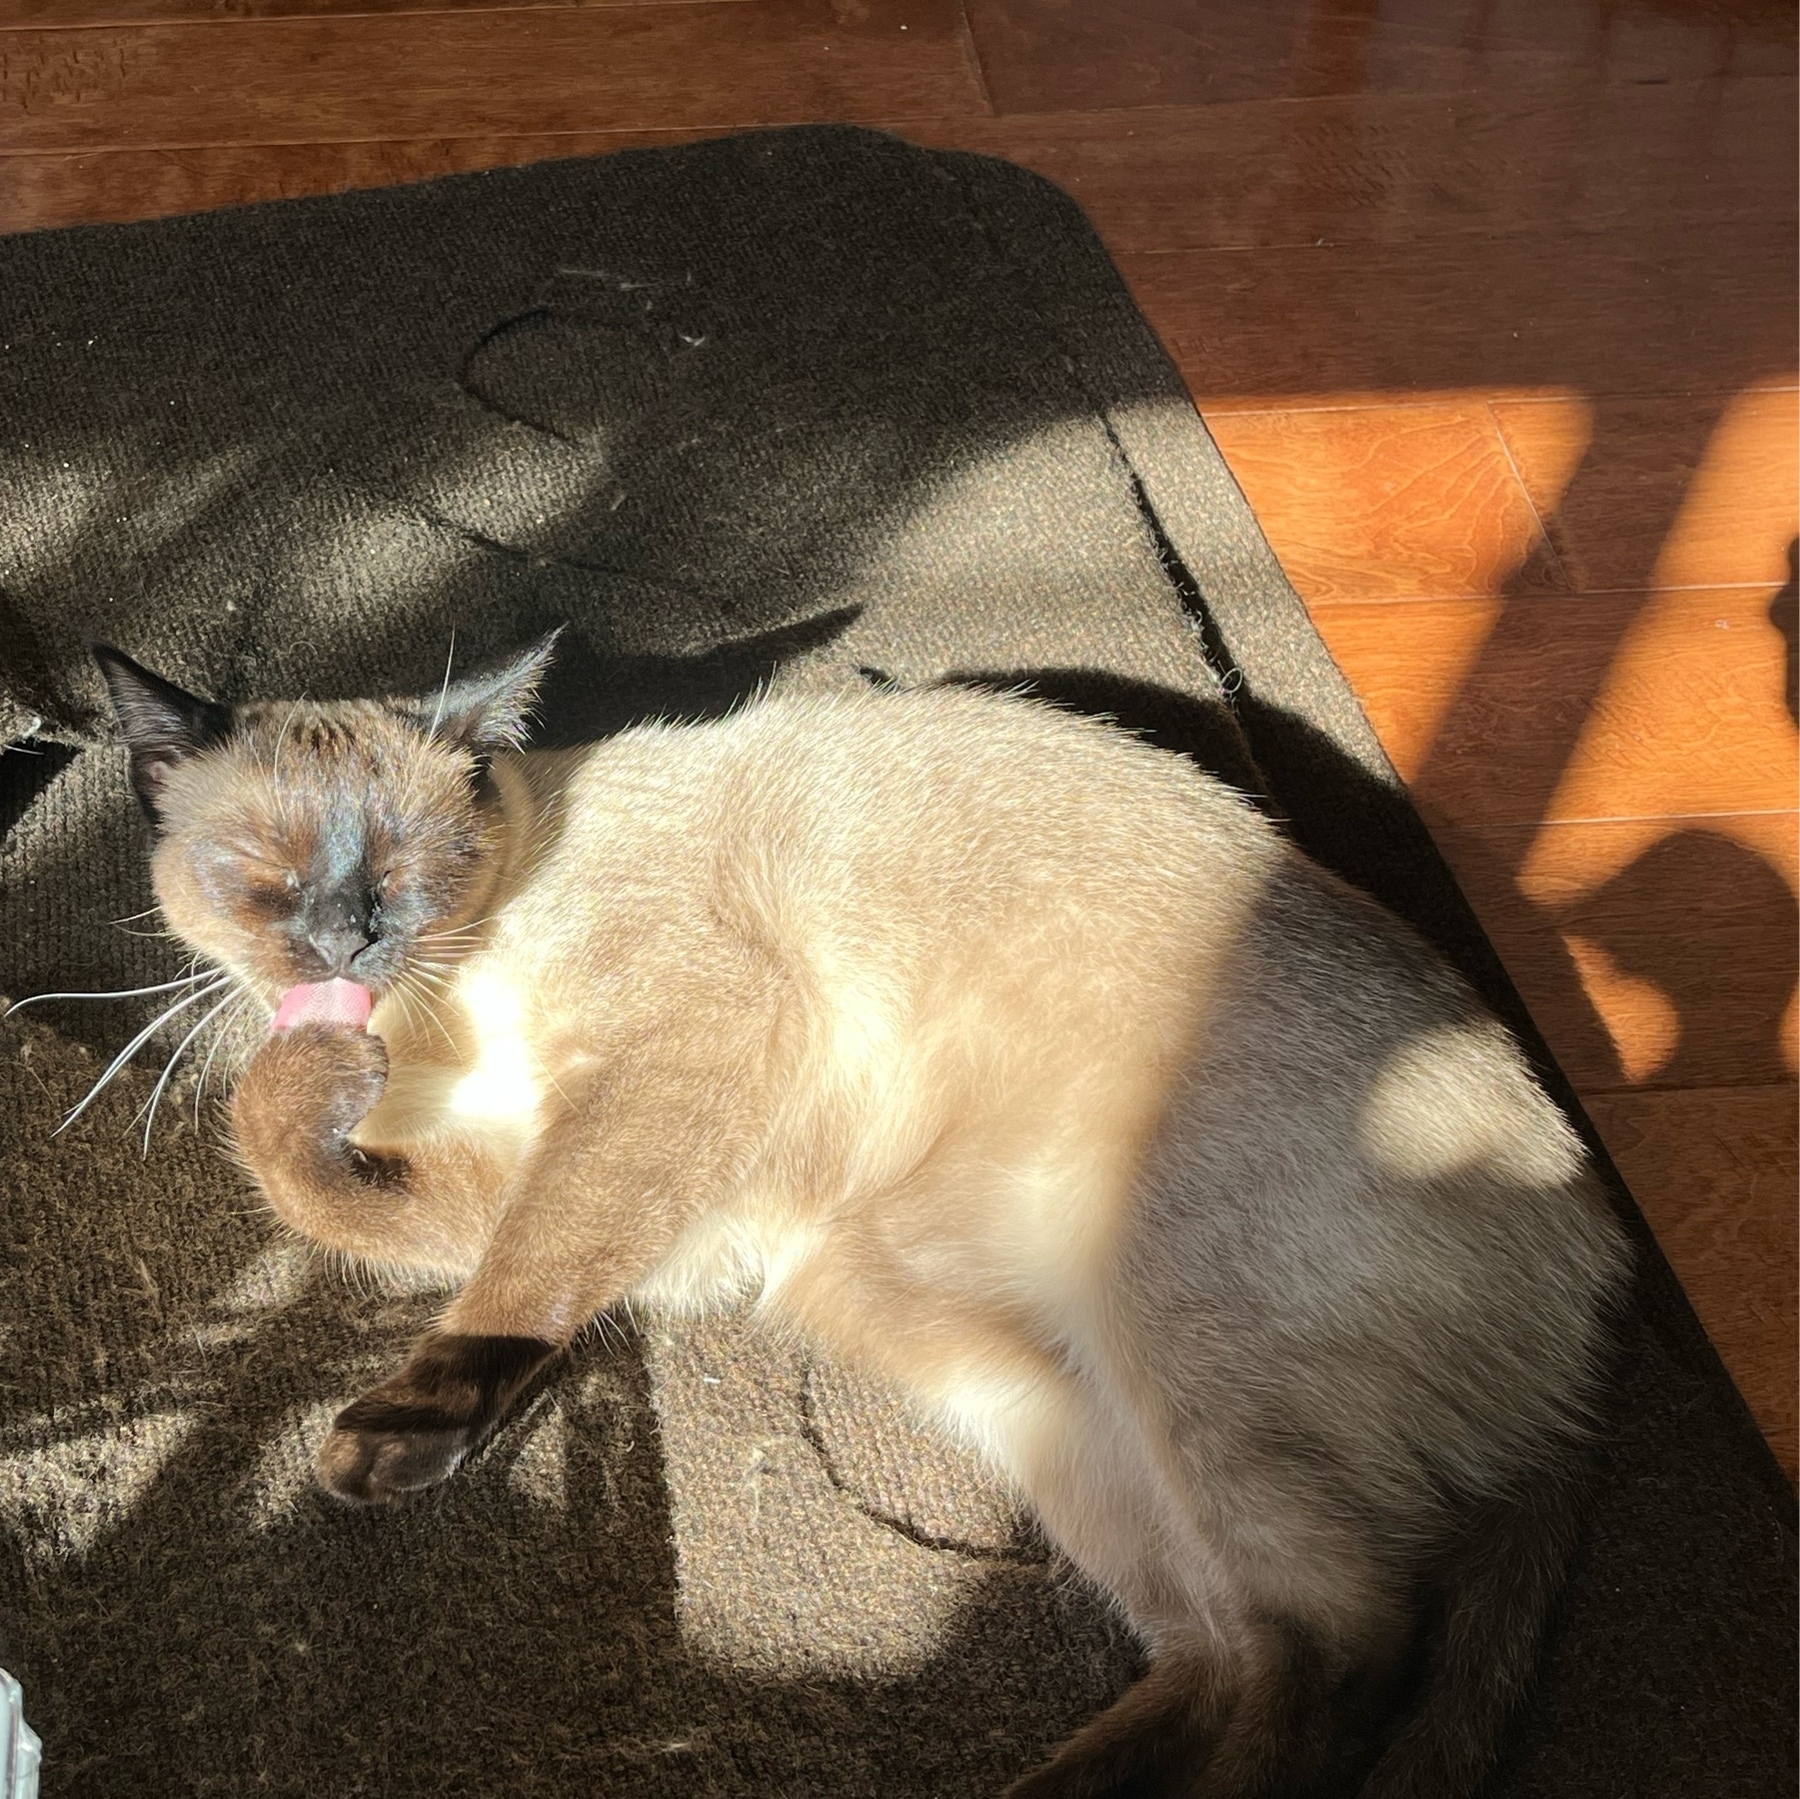 Siamese mix cat, lying on a brown rug in dappled sunlight, with her eyes closed, licking her paw.